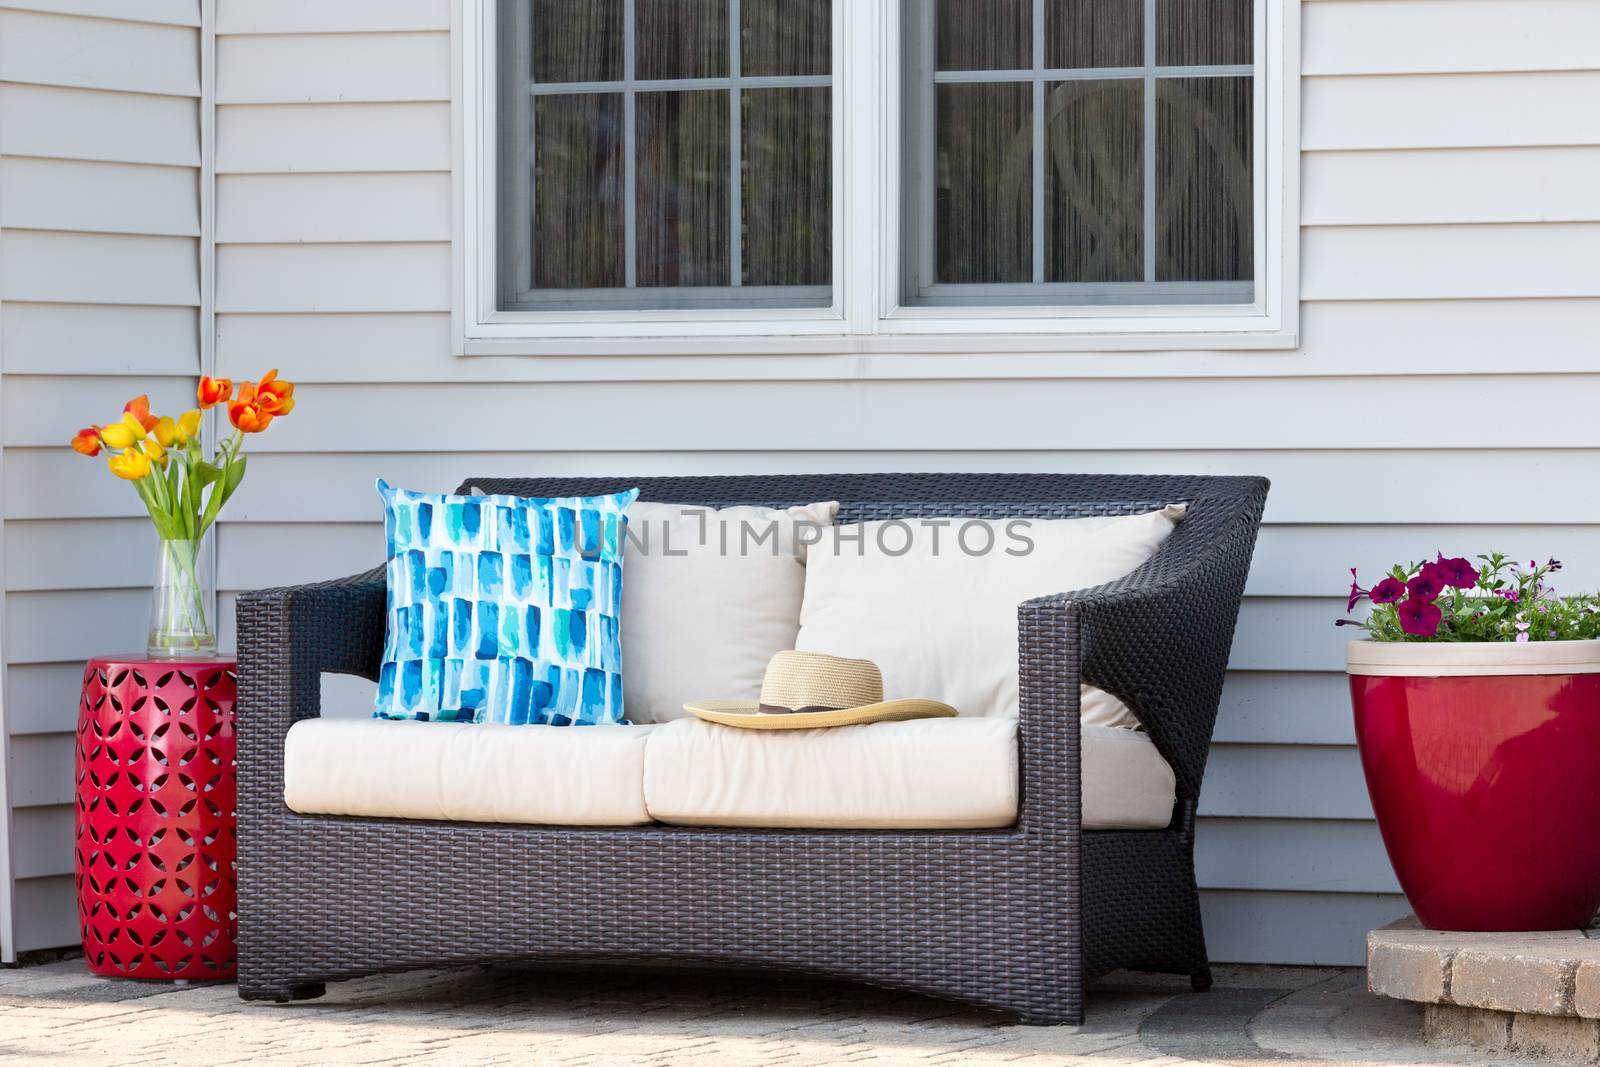 Comfortable outdoor living area on a brick patio with a deep seating settee and cushions flanked by red ceramic pedestal table and flowerpot with spring flowers and a straw sunhat